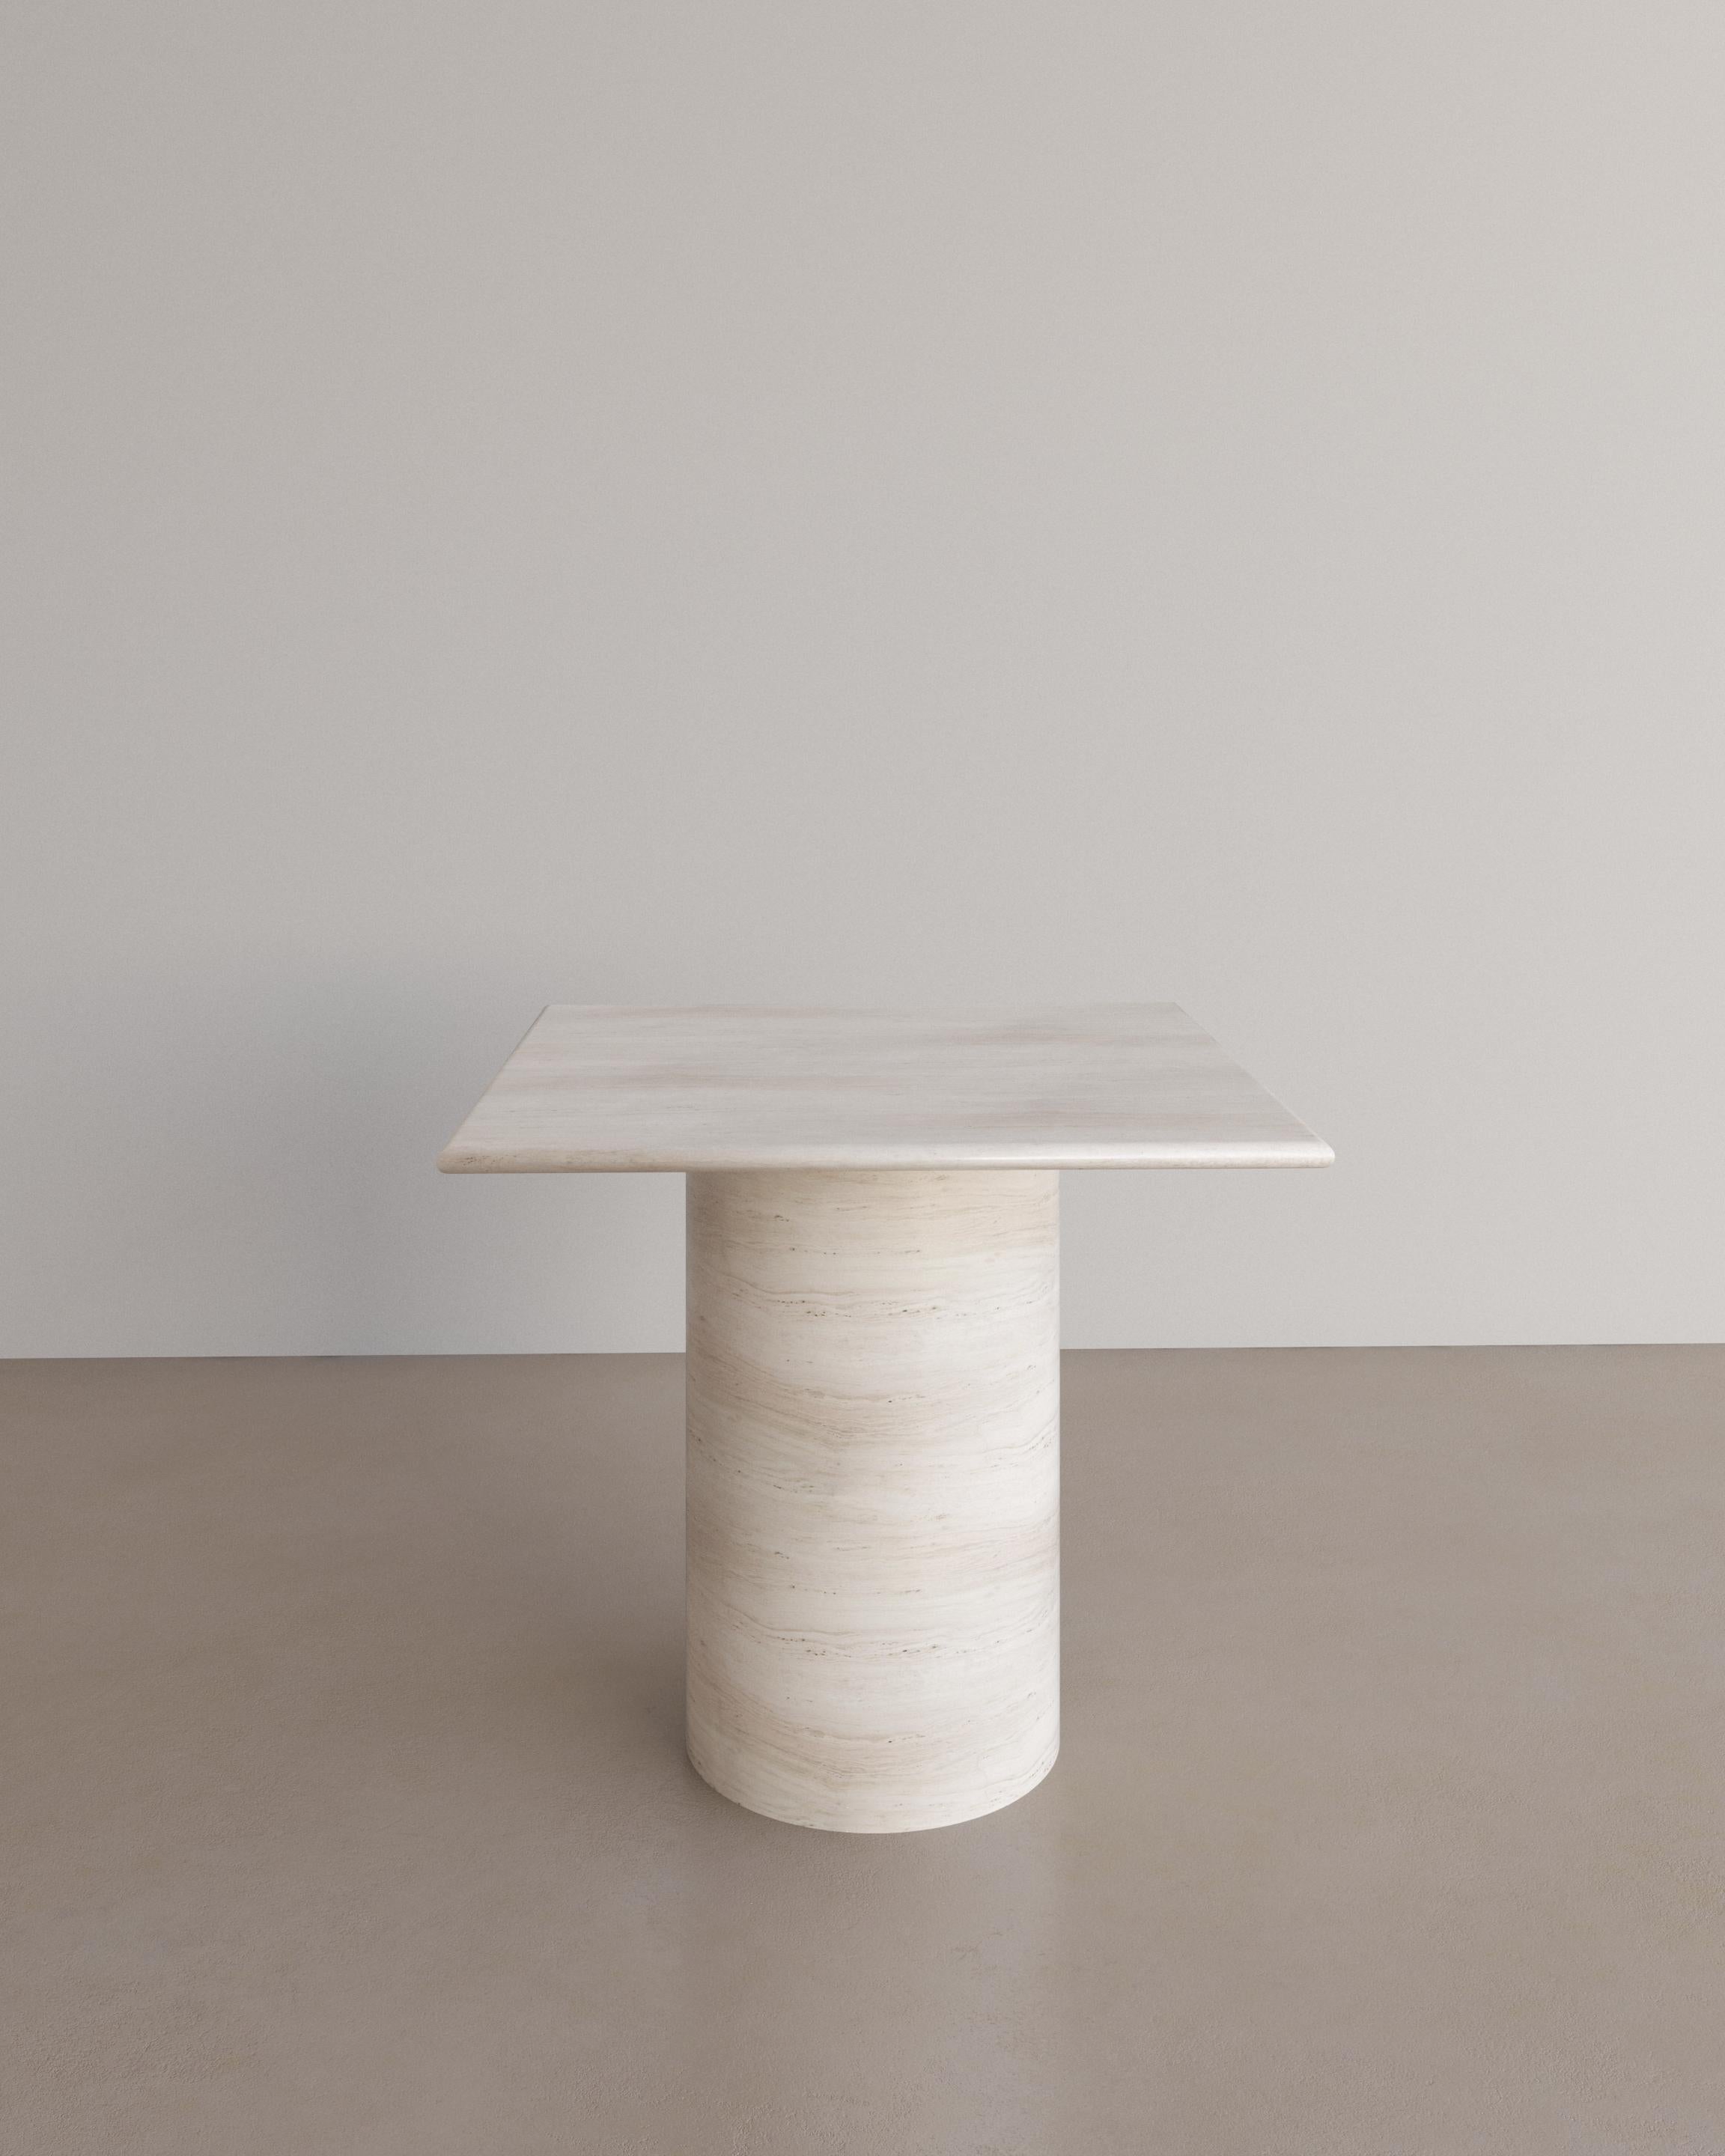 The Essentialist presents the Voyage Occasional Table II in Nude Travertine. 
The Voyage Occasional Table I celebrates the simple pleasures that define life and replenish the soul through harnessing essential form. Envisioned as an ode to